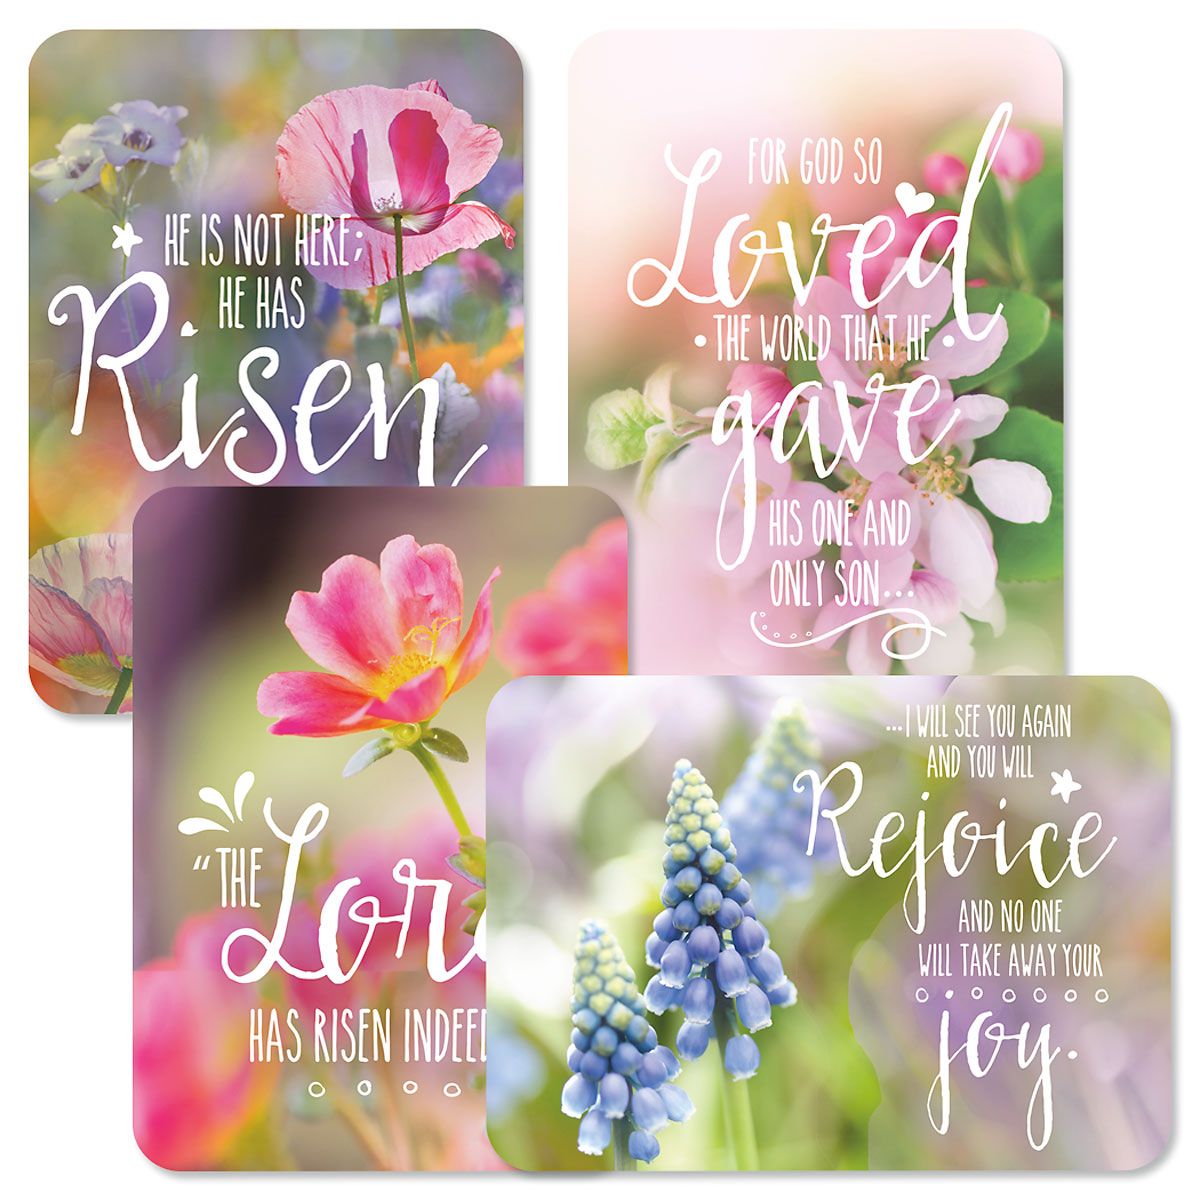 easter-sunday-happy-easter-religious-messages-50-most-wonderful